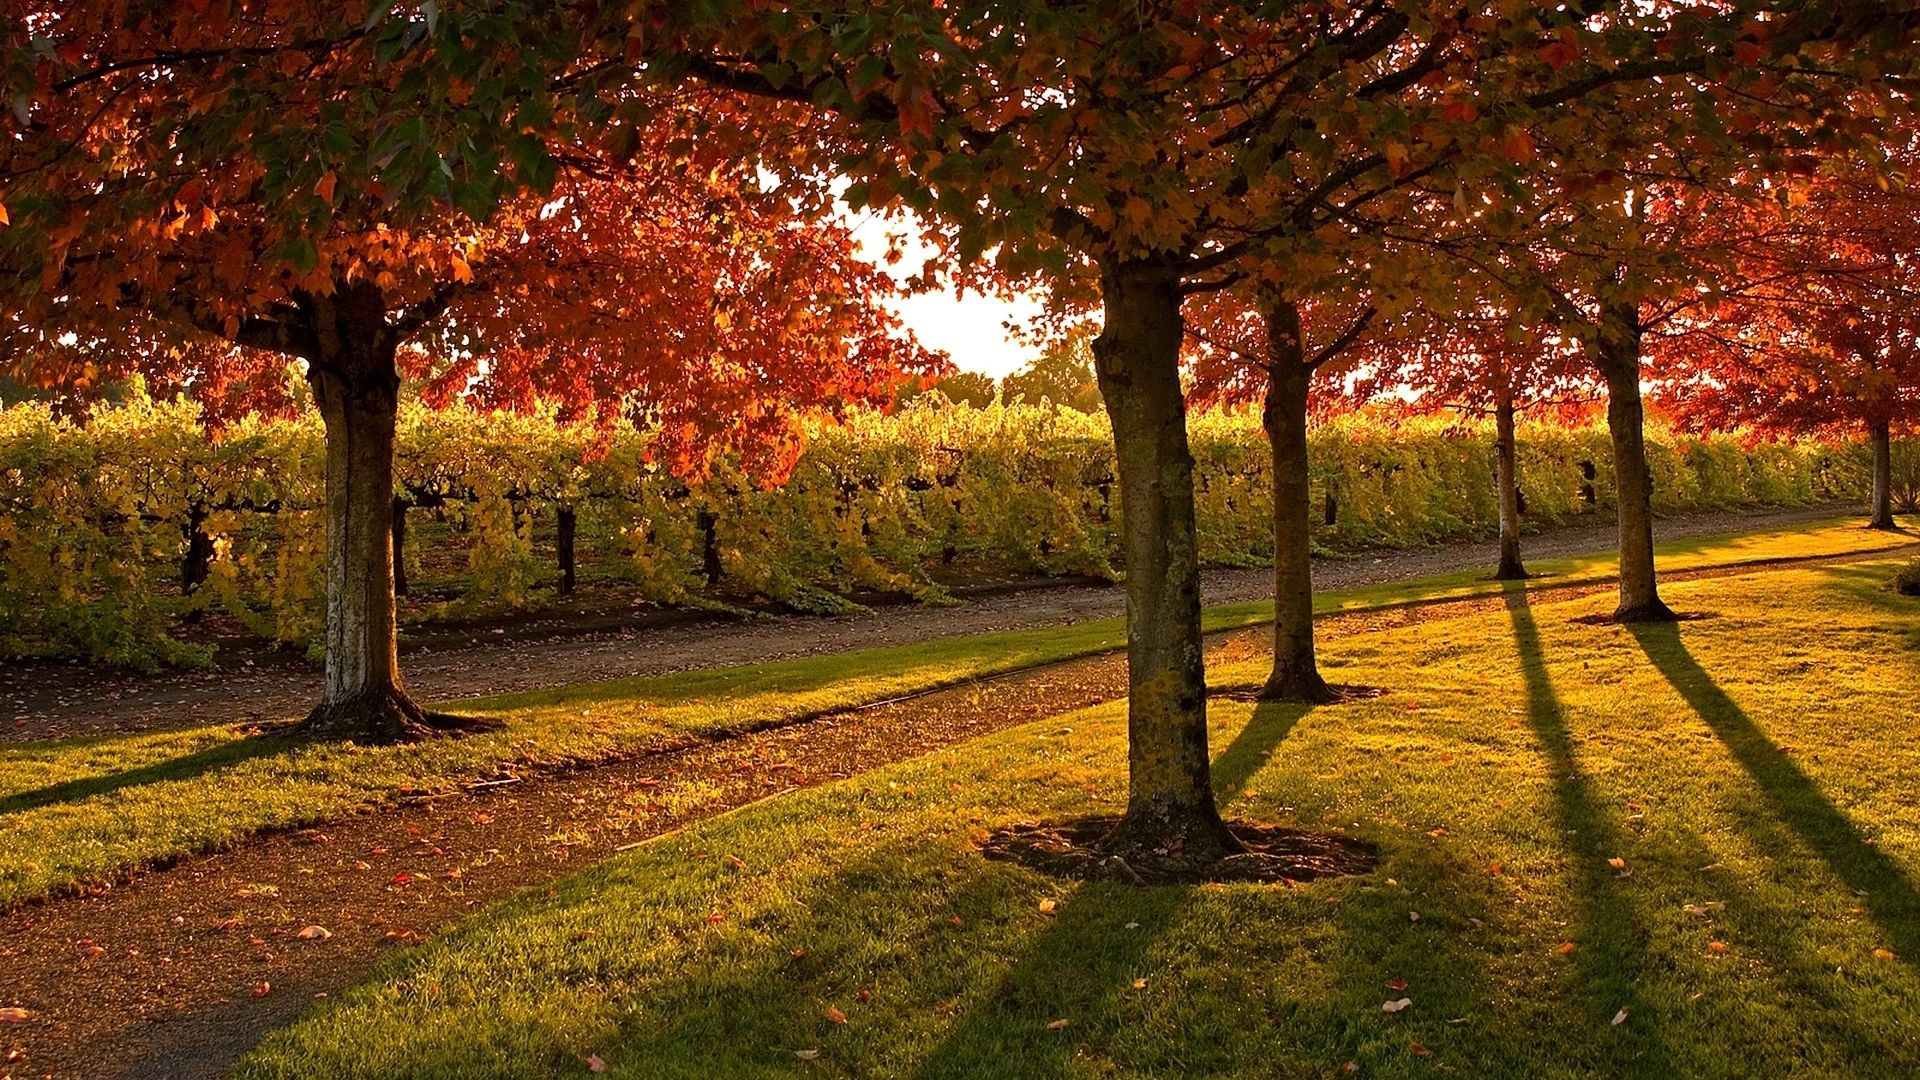 Download Wallpaper 1920x1080 garden, trees, autumn, footpath, poles, leaves, lawn, evening Full HD 1080p HD Background